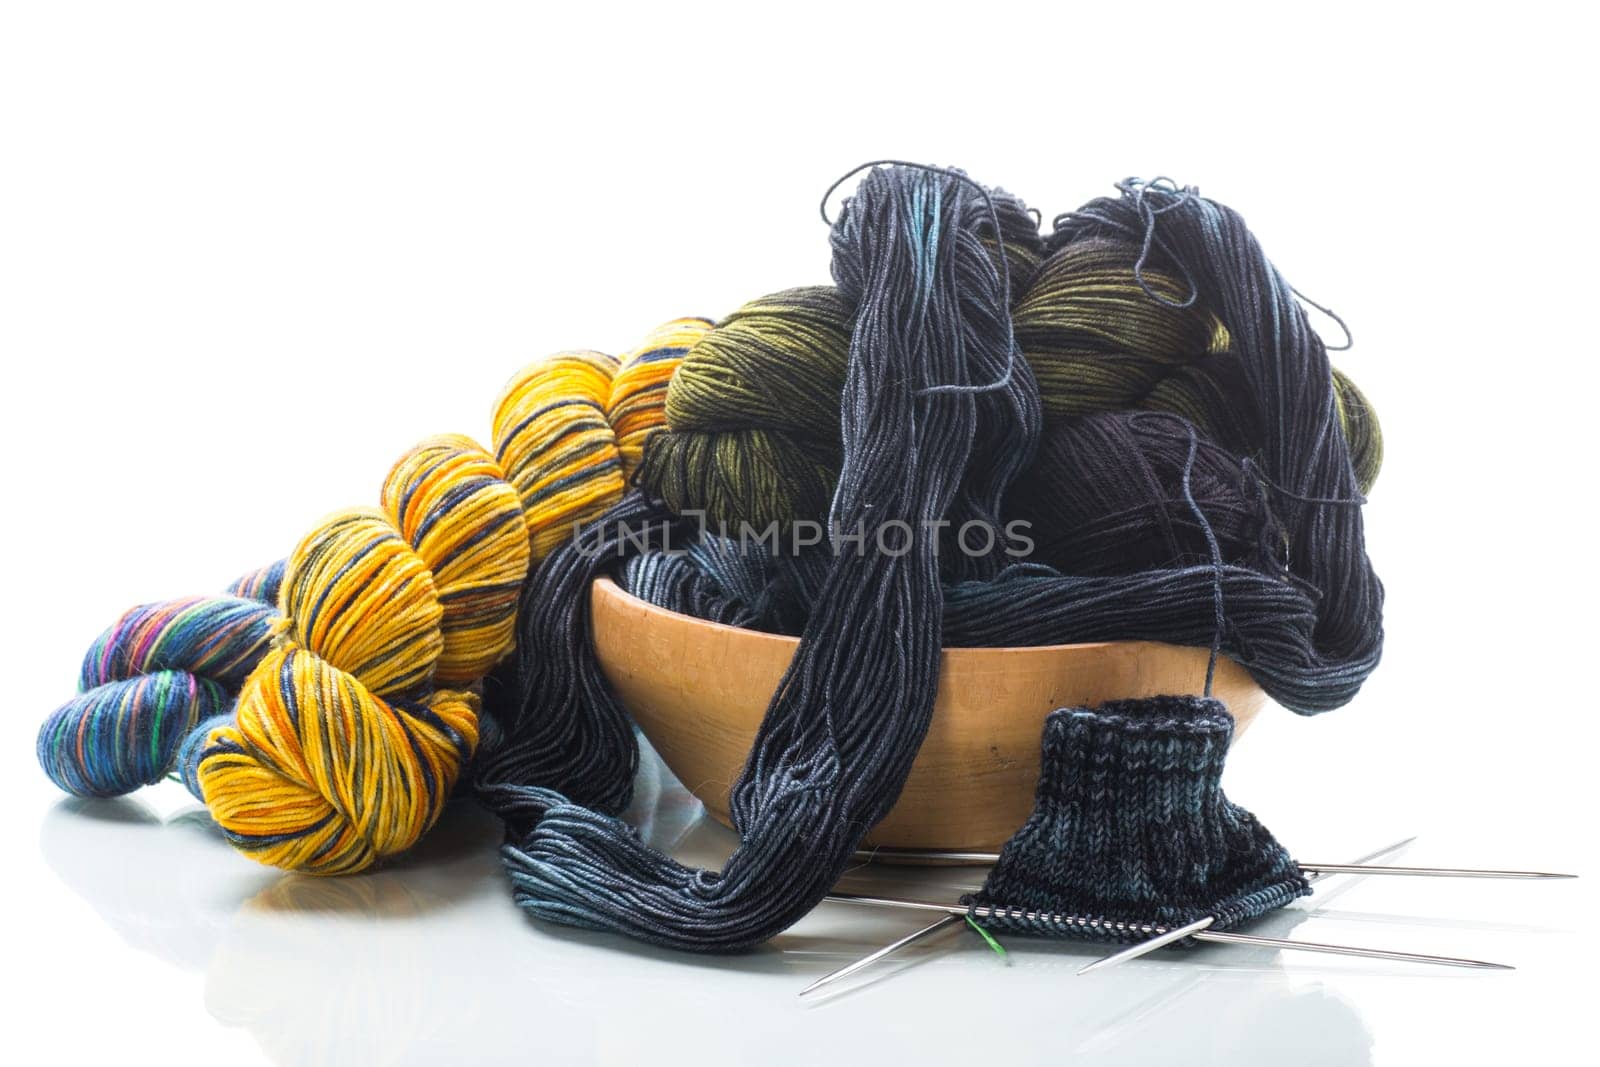 Colored threads, knitting needles and other items for hand knitting, isolated on a white background.